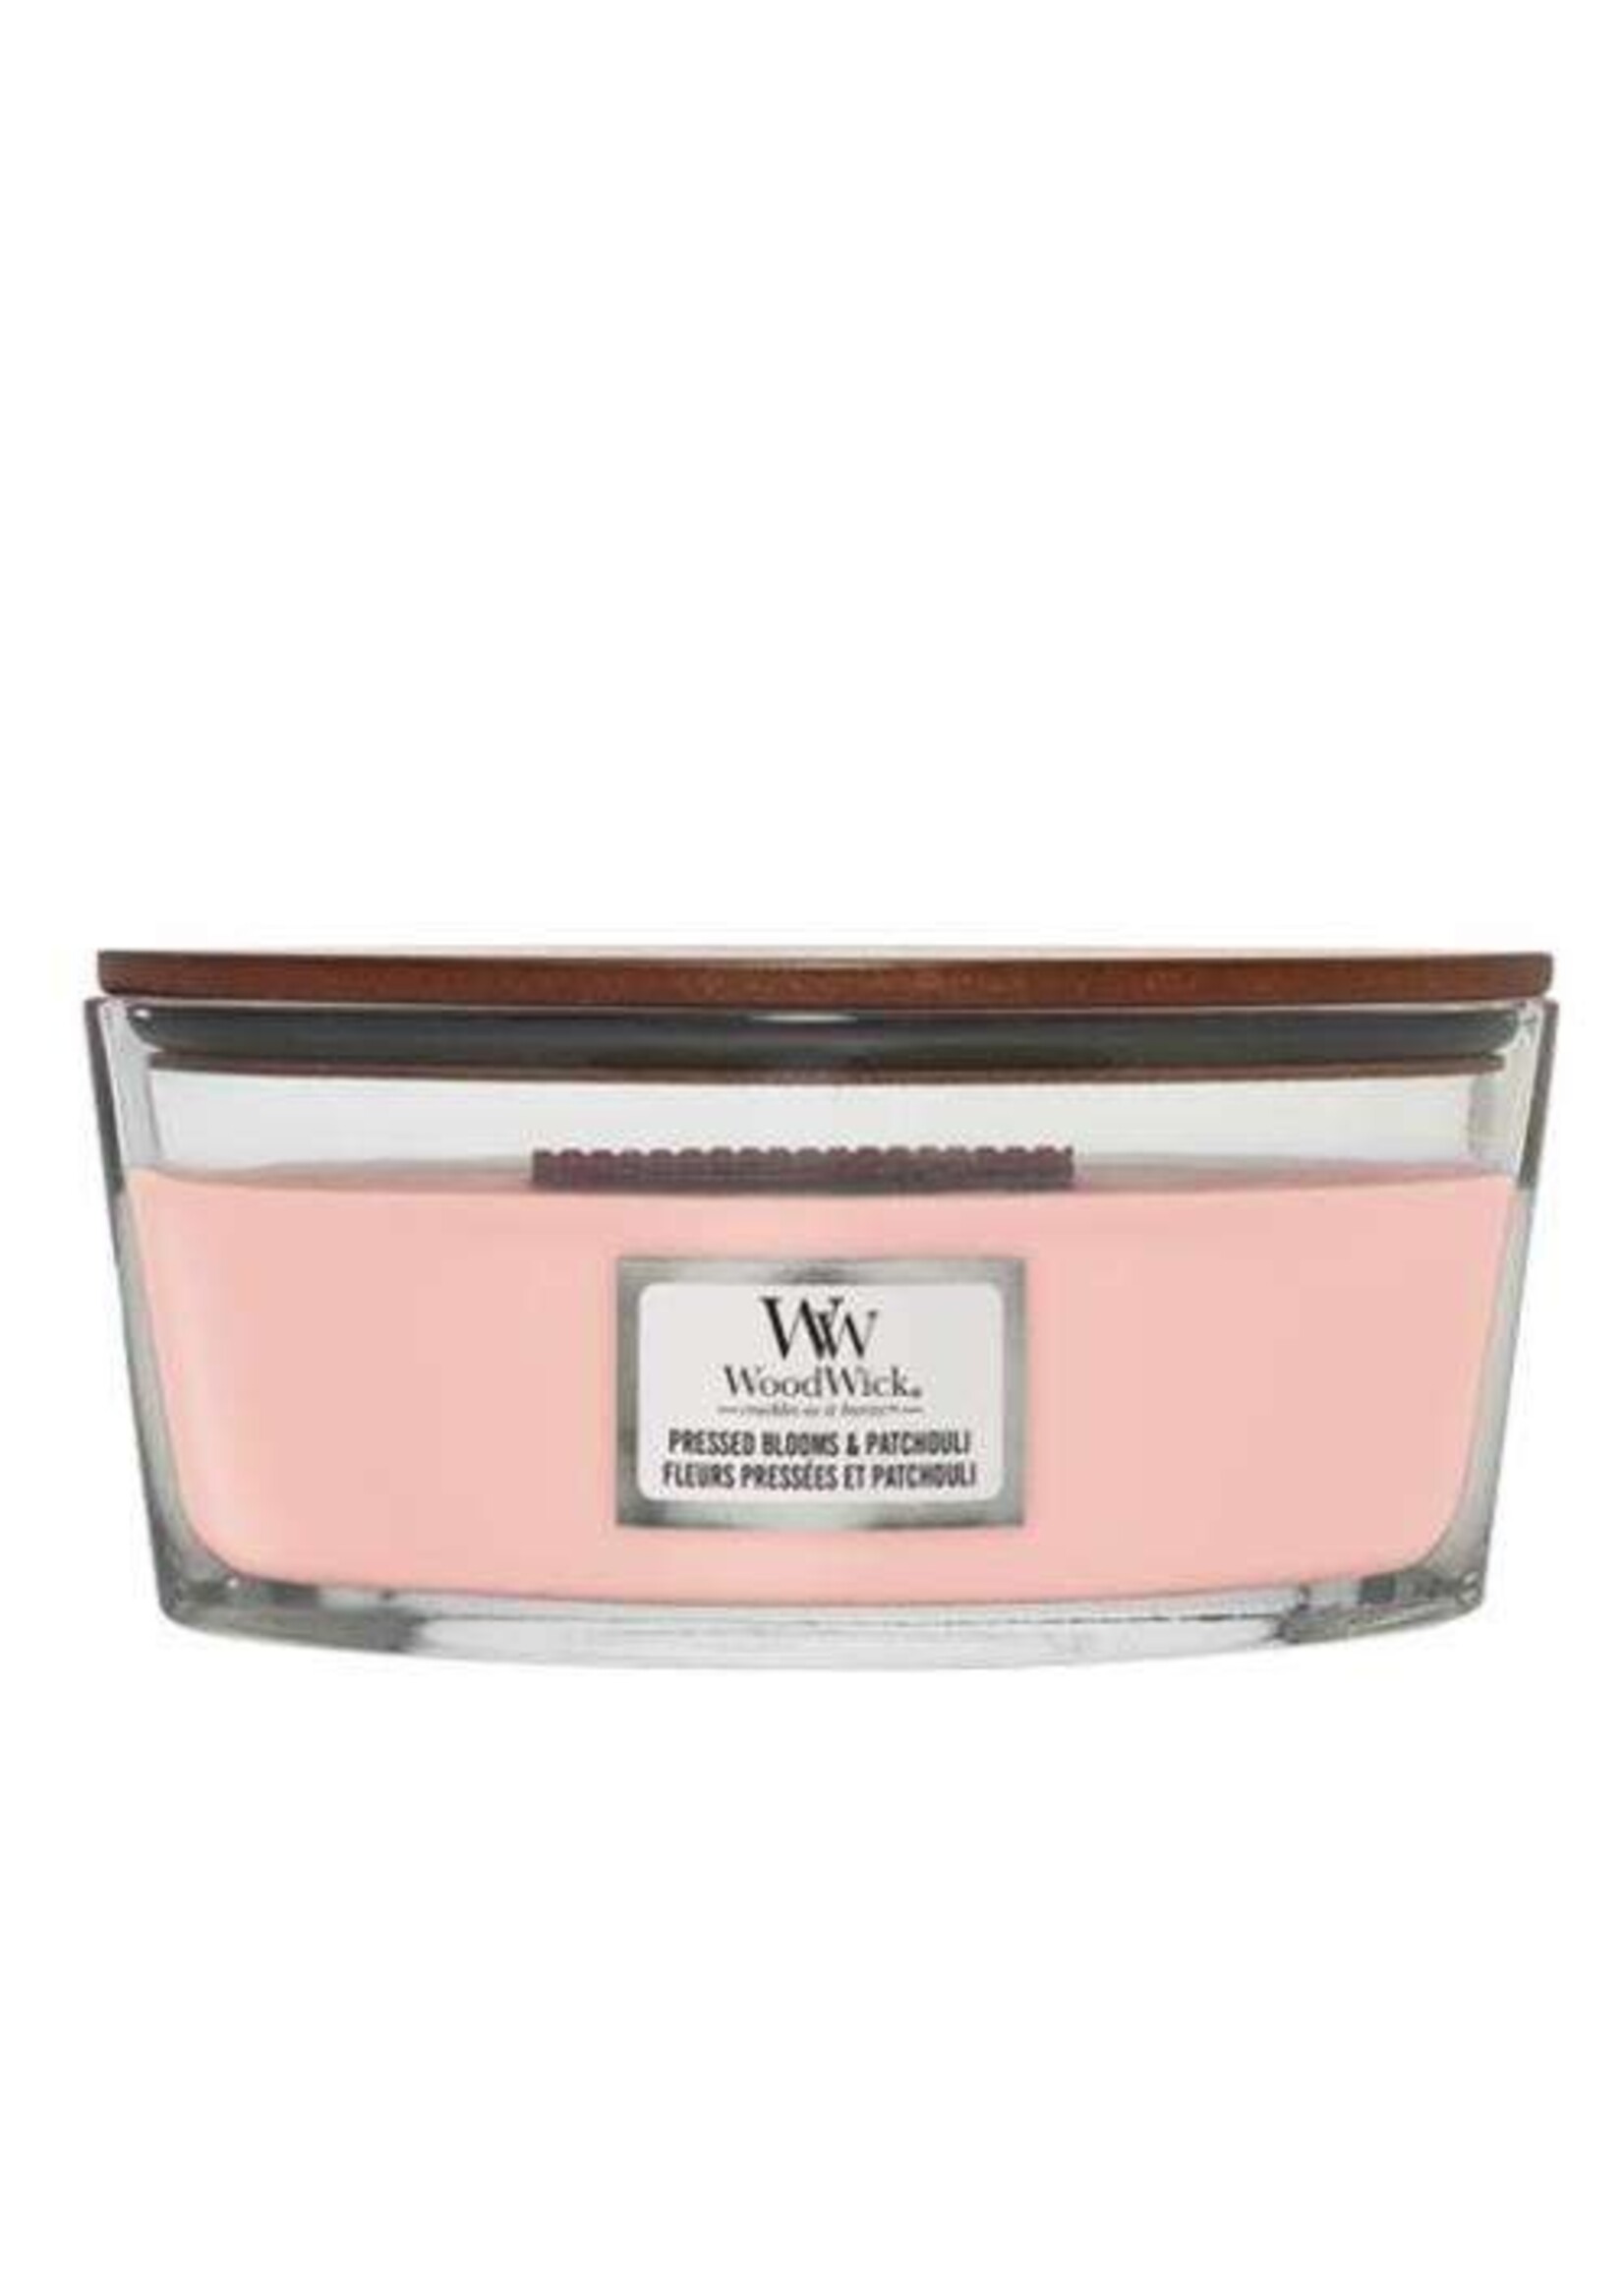 Woodwick Pressed Blooms & Patchouli Ellipse Candle WoodWick